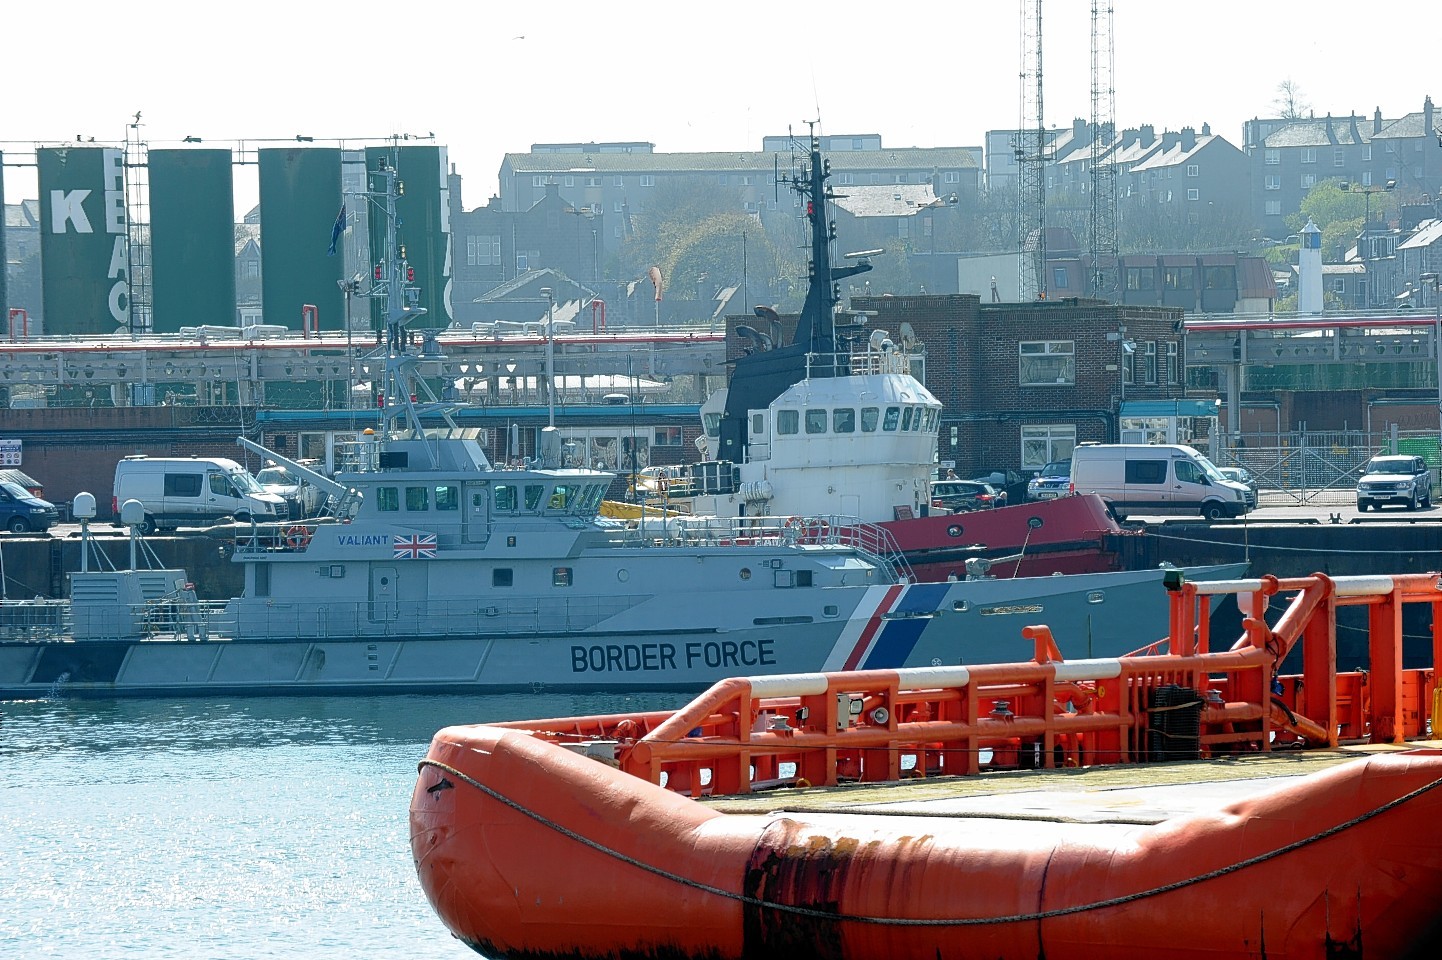 HMS Valiant Border Force vessel berthed at Aberdeen harbour after escorting the boat in to be searched. 
Picture by Kevin Emslie